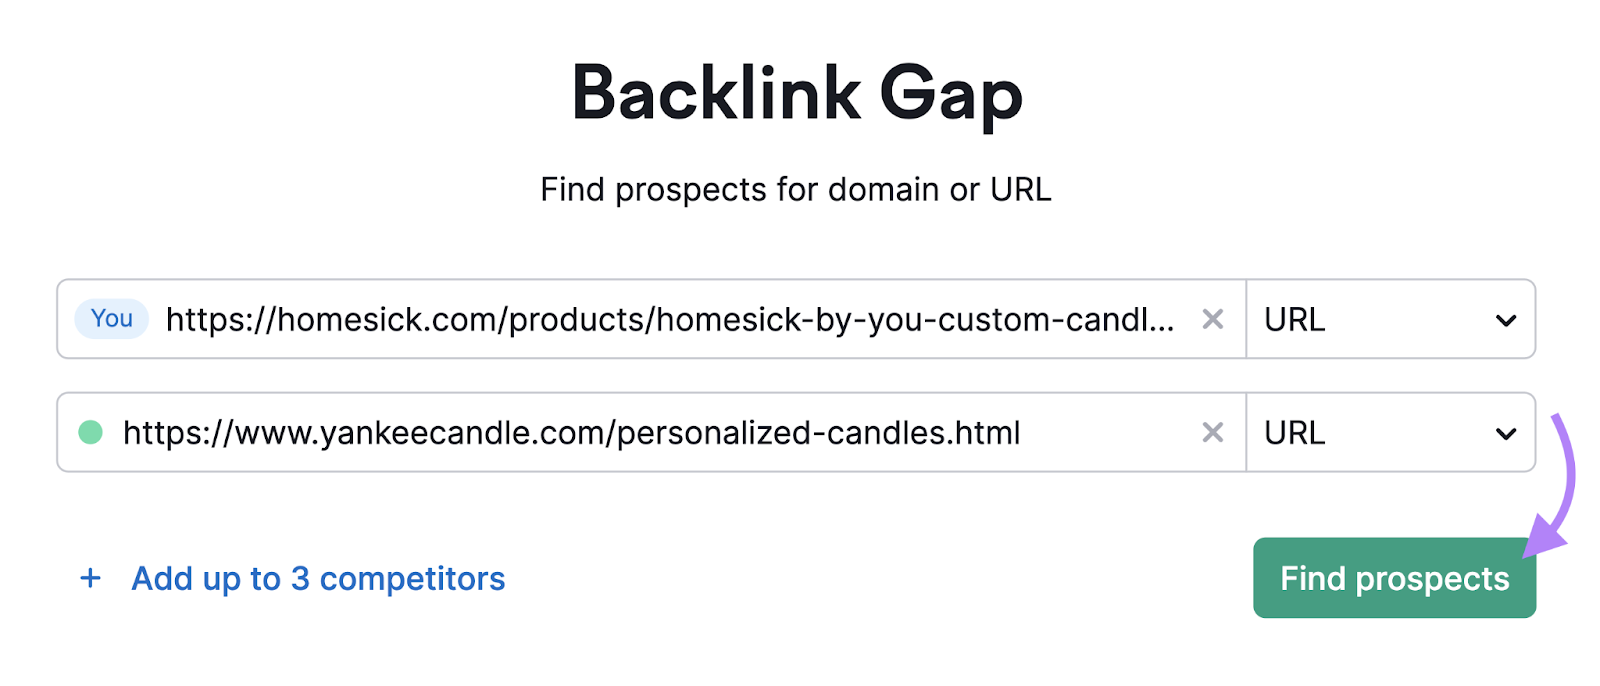 Search bars successful  the Backlink Gap tool